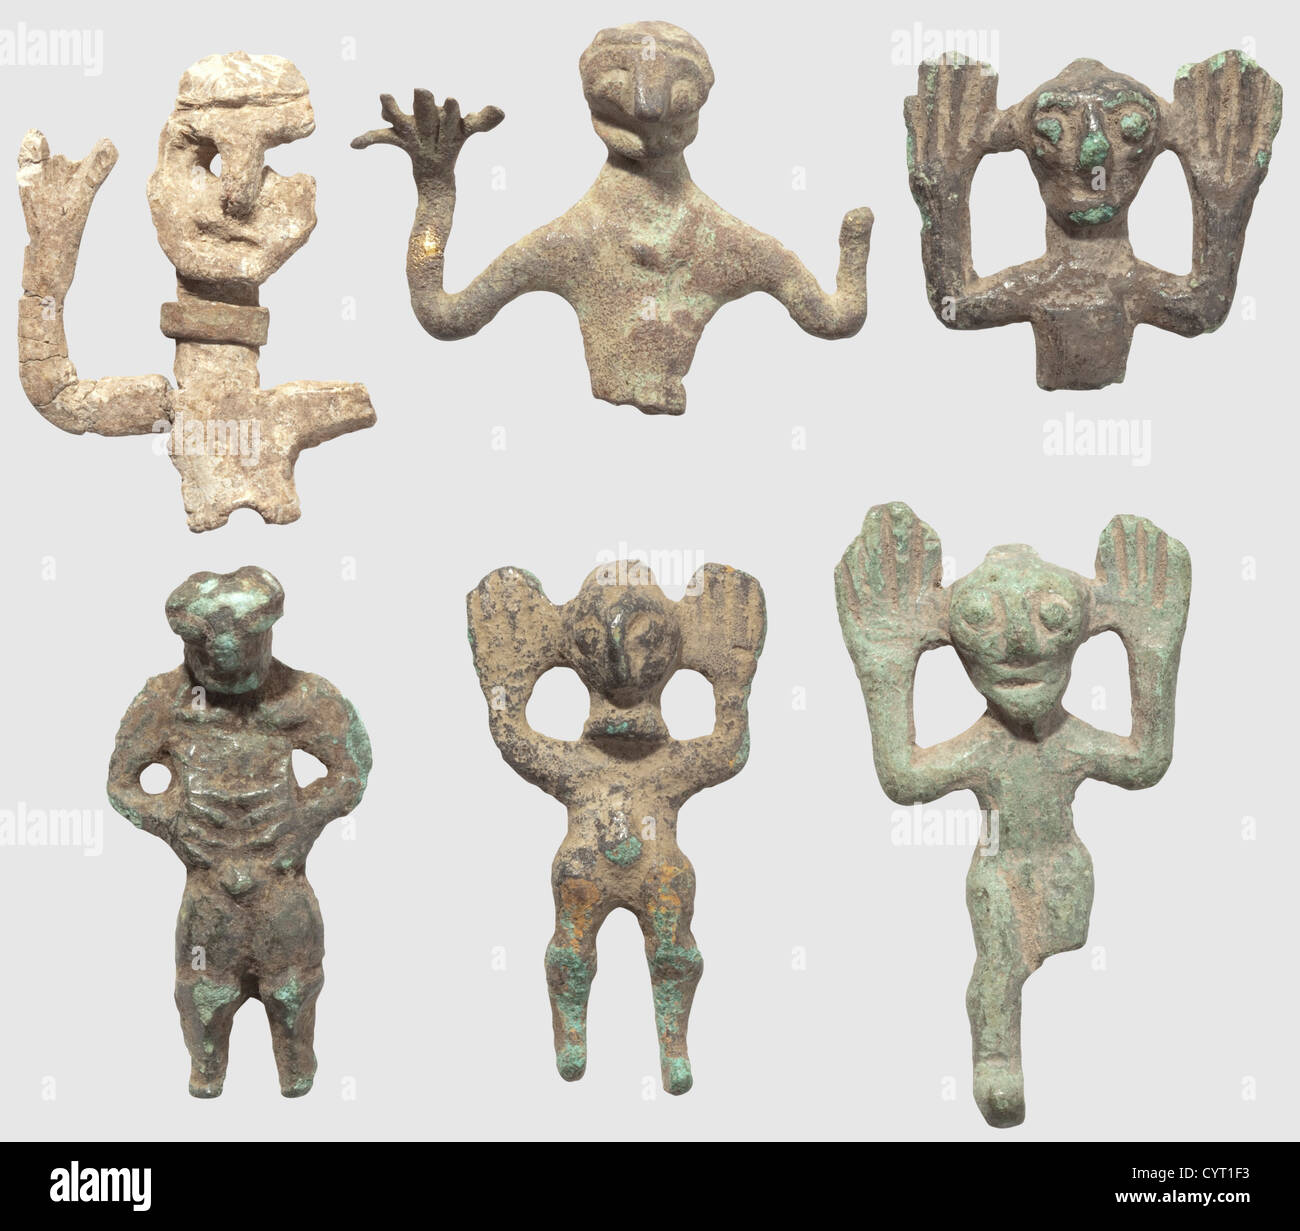 Collection of West Asian(steppe tribal)votive figures,8th-6th century B.C. Cast of solid bronze and lead,the patina varying. Consisting of 33 different figures(partially incomplete)and figure parts with raised hands or hands held in front of the abdomen. Heights between 1.8 and 6.3 cm. Cf. Archäologie der Sowjetunion vom Altertum bis zum Mittelalter,Bronzezeit Mittelasiens und des Kaukasus(1992),fig. 50 ff. Provenance: South German private collection,1970s and later,historic,historical,people,20th century,ancient world,ancient world,ancient tim,Additional-Rights-Clearences-Not Available Stock Photo